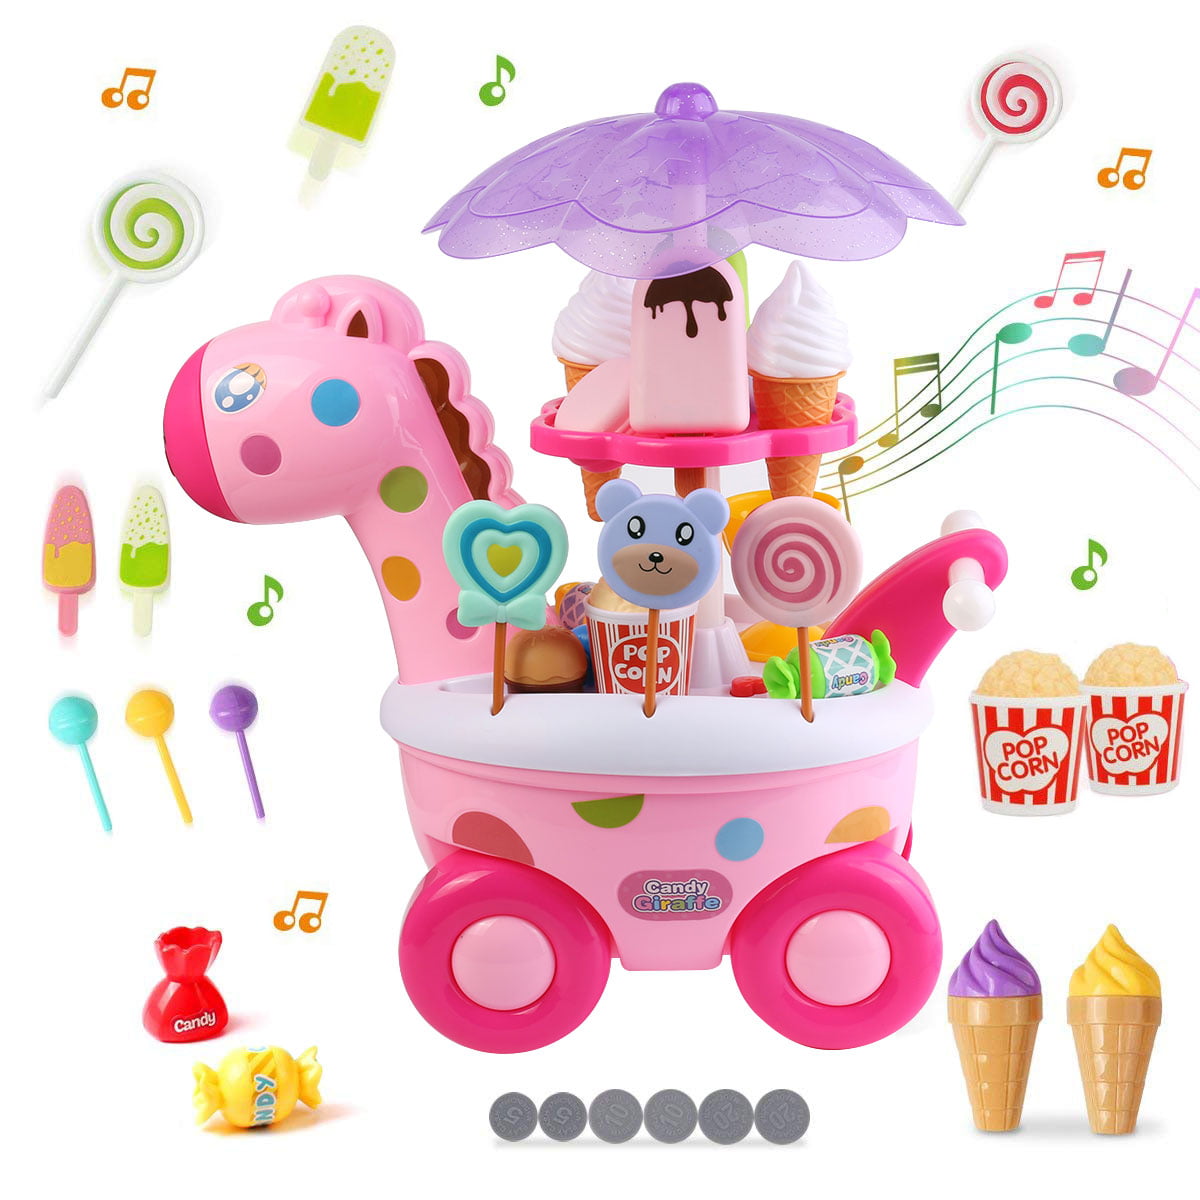 Ice Cream Candy Sweet Shop Trolley Playset Toy Fun Pretend Play Kids Xmas Gift 